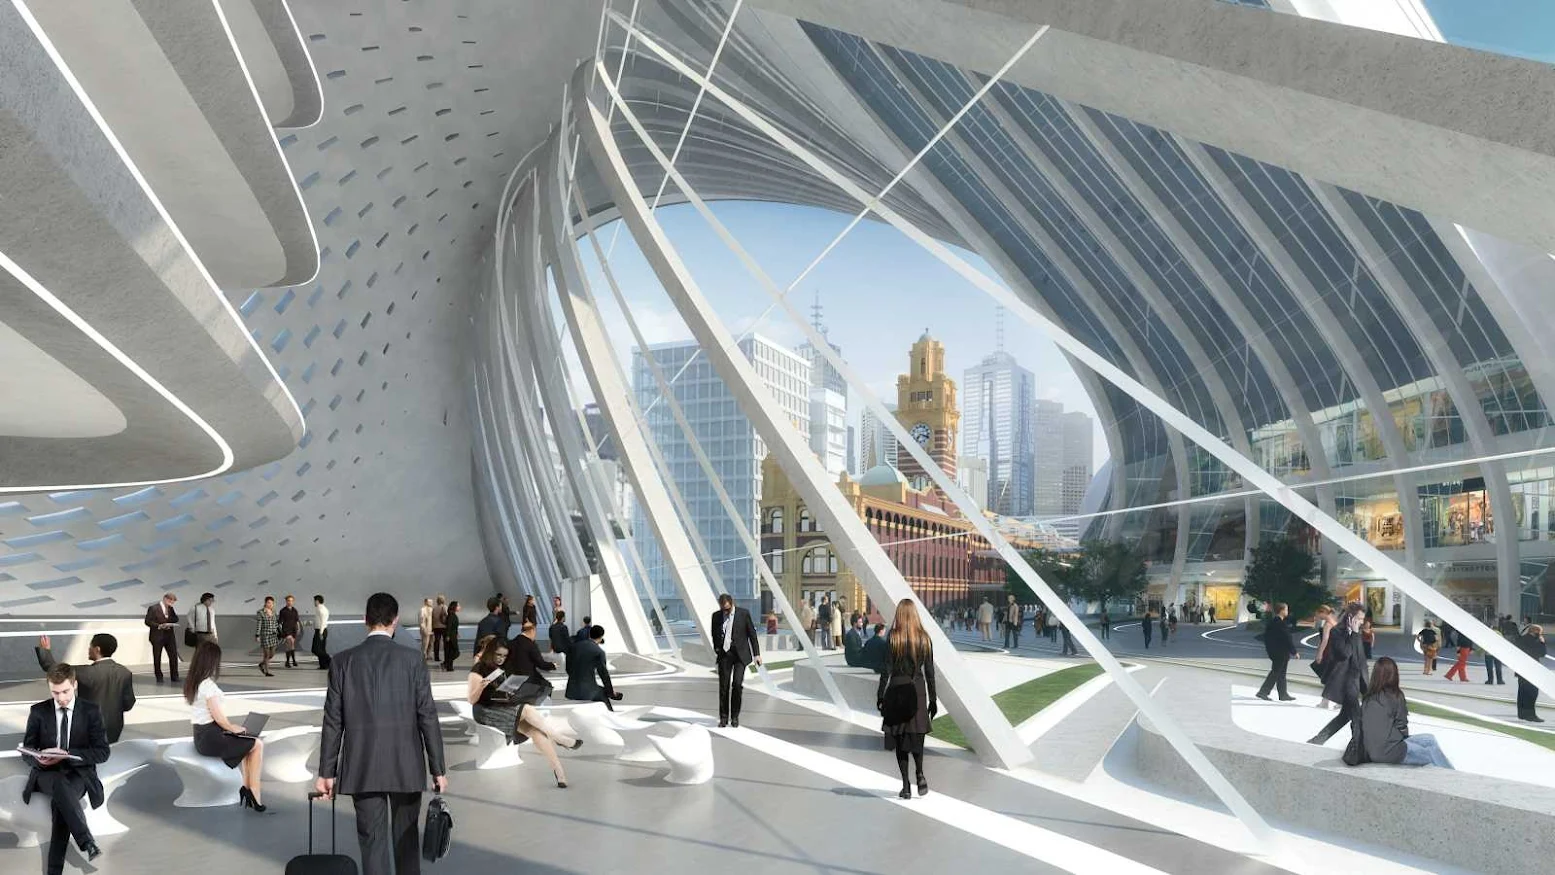 01-Flinders-Street-Station-Design-Competition-by-Zaha-Hadid+BVN-Architecture